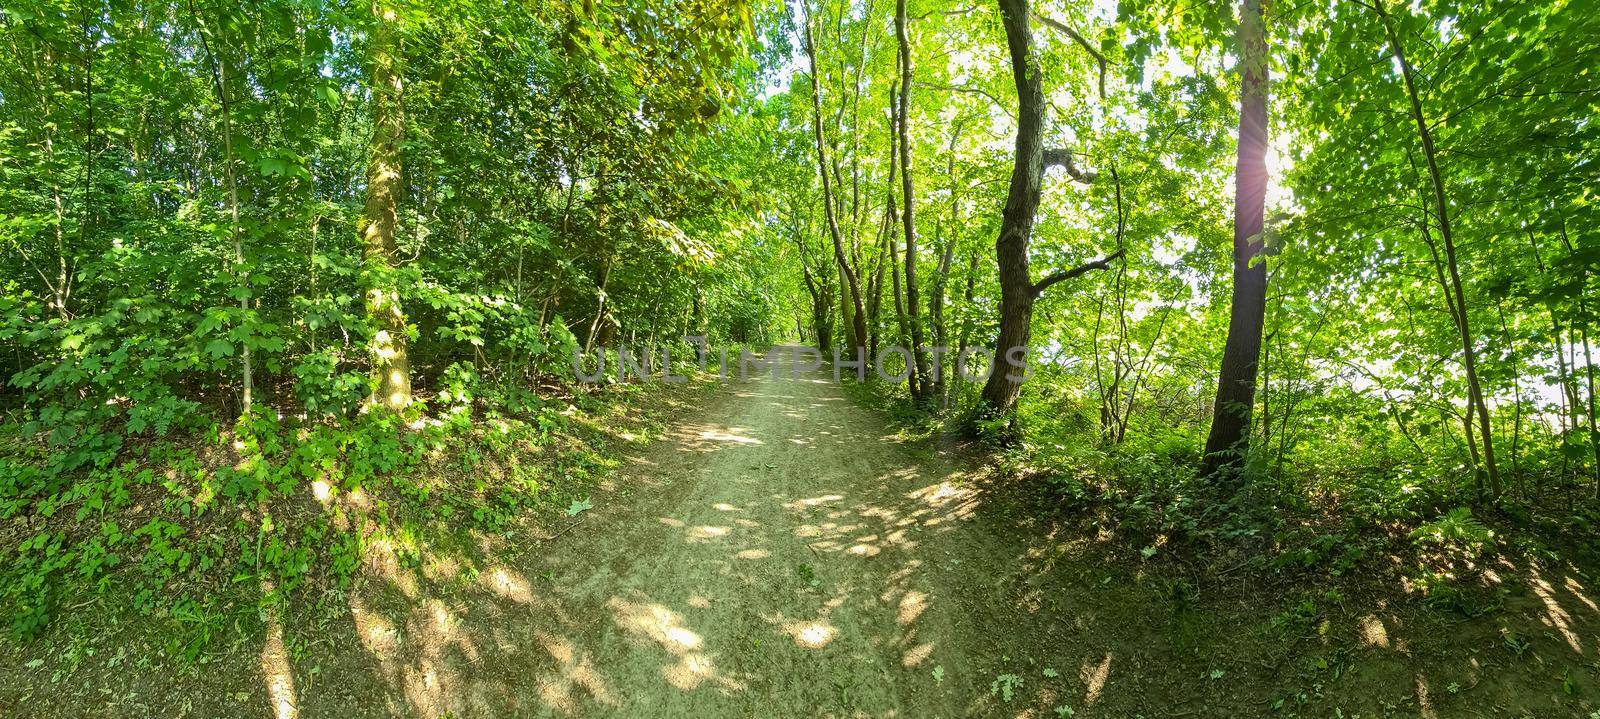 Beautiful view at a path in a dense green forest with bright sunlight casting deep shadow.